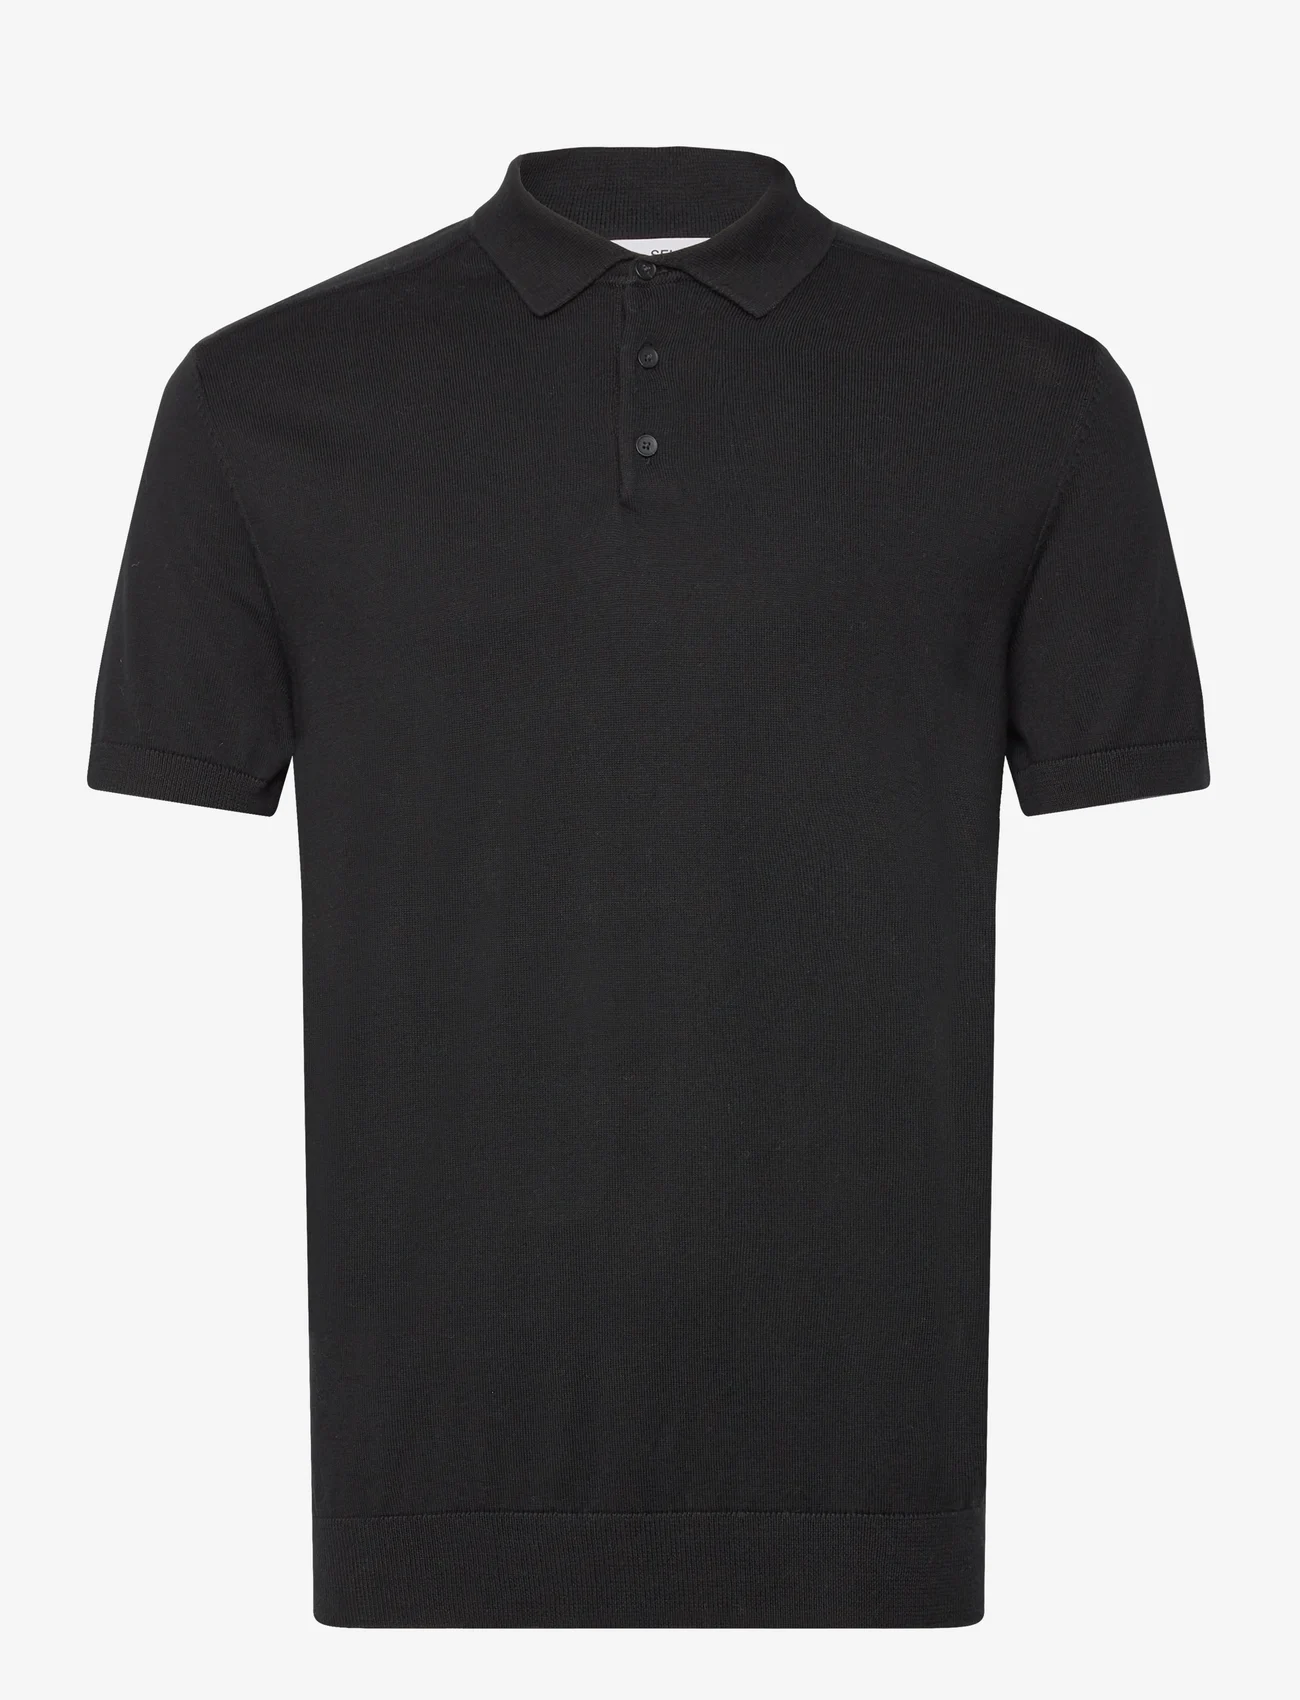 Selected Homme - SLHBERG SS KNIT POLO NOOS - herren - black - 0